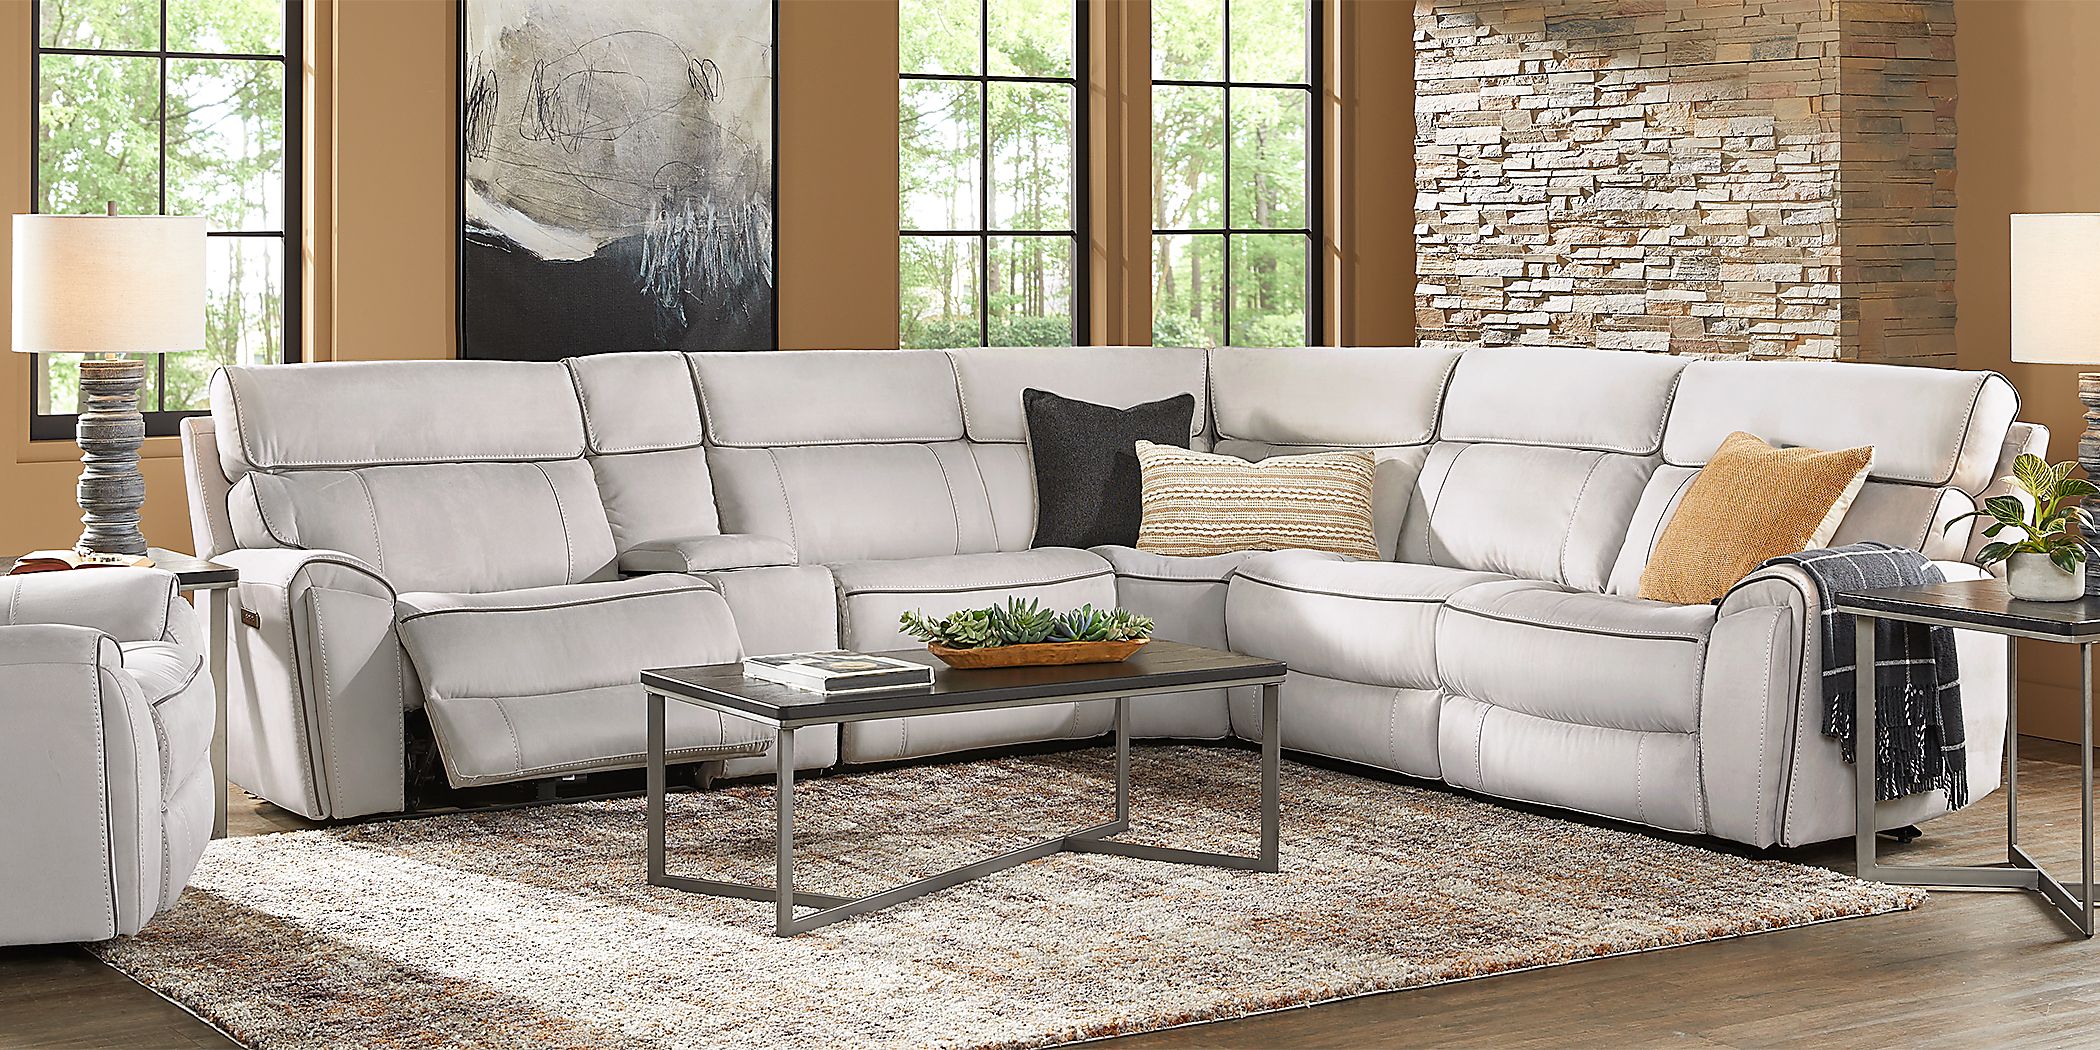 Rooms To Go Emmett Avenue Gray 9 Pc Dual Power Reclining Sectional Living Room